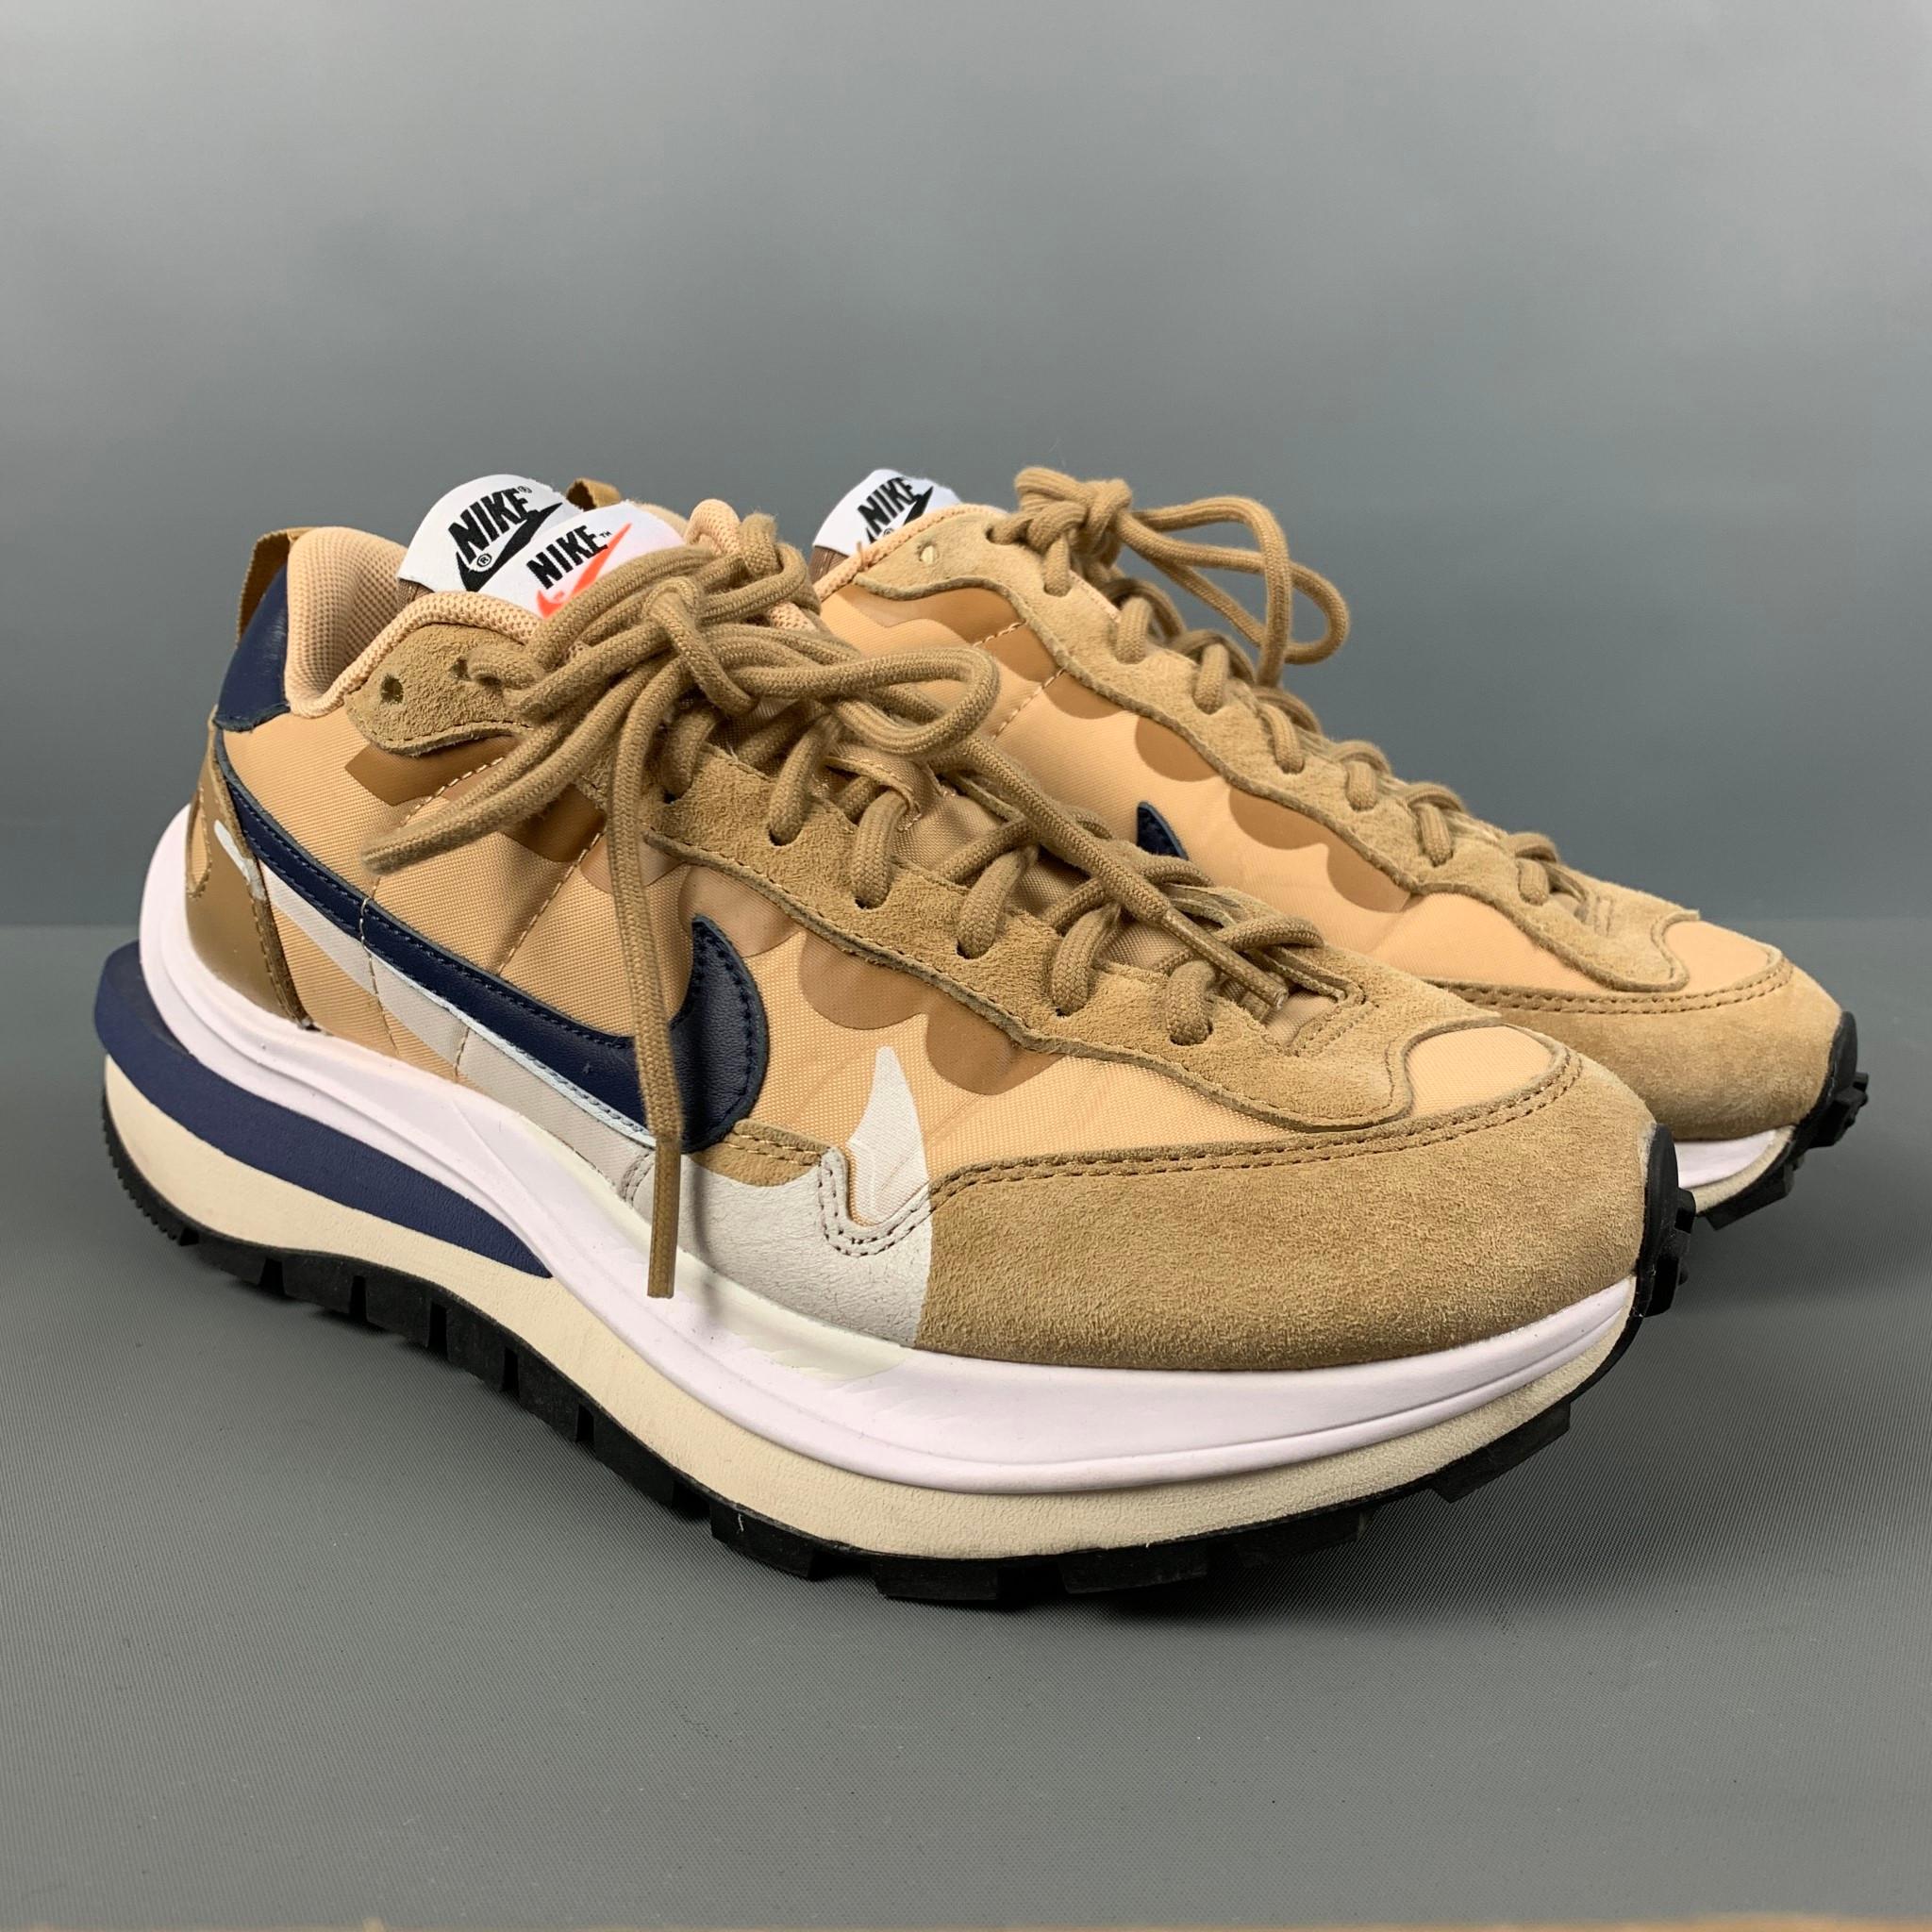 NIKE x SACAI sneakers comes in a tan and navy mixed materials featuring a tan suede detail, double tongue, low-top style, rubber soles, and a lace up closure.

Excellent Pre-Owned Condition.
Marked: 7.5

Outsole: 12 in. x 4.5 in. 

 

SKU: